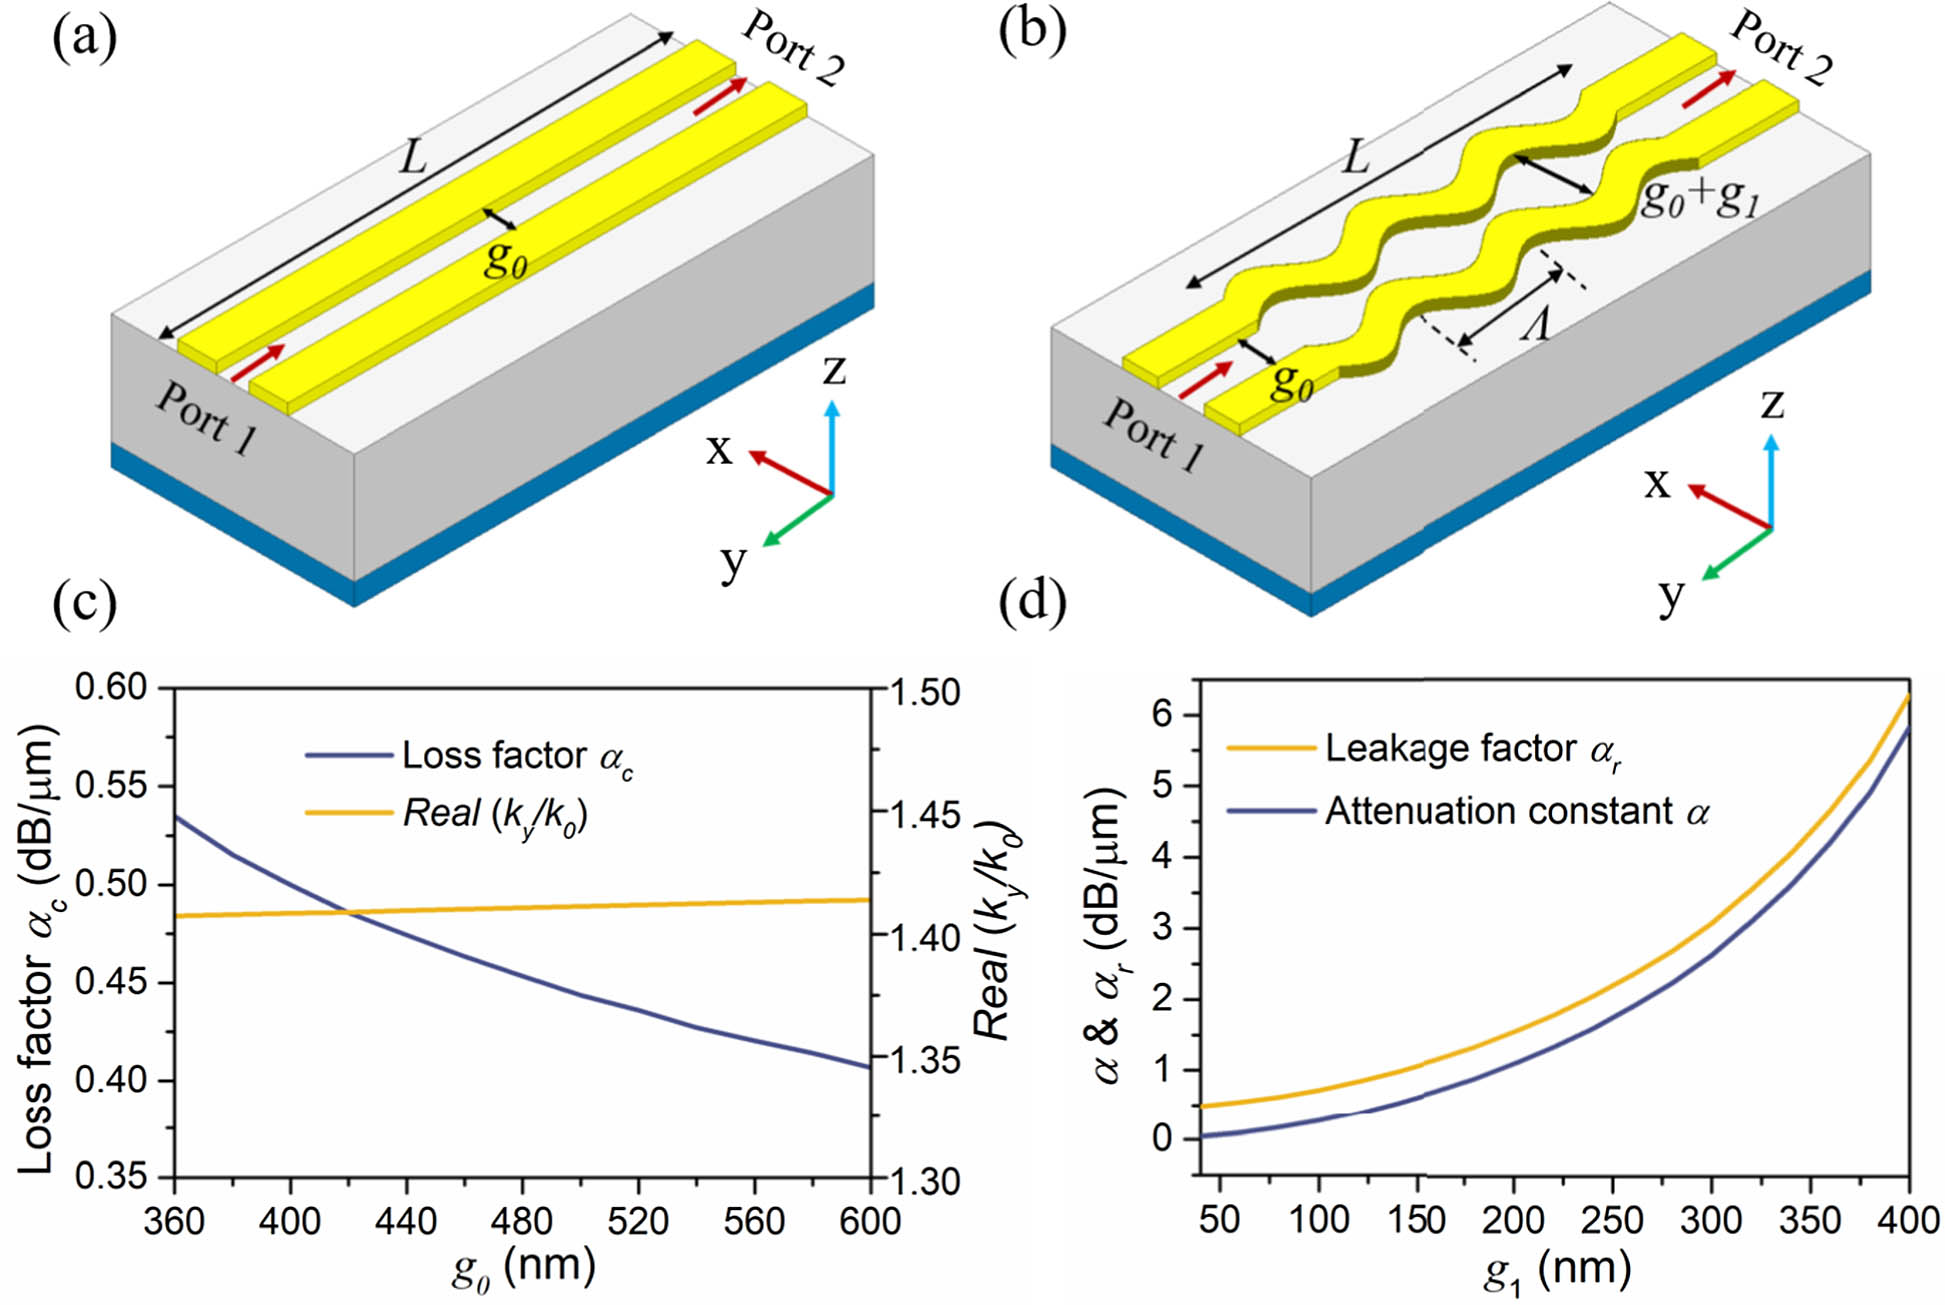 Schematic views of (a) uniform plasmonic gap waveguide and (b) sinusoidally modulated antenna. (c) Metal absorption loss αc and normalized phase constant versus gap width g0. (d) Average attenuation constant α of the system and leakage factor αr of the antenna as a function of modulation amplitude g1 with g0=600 nm.